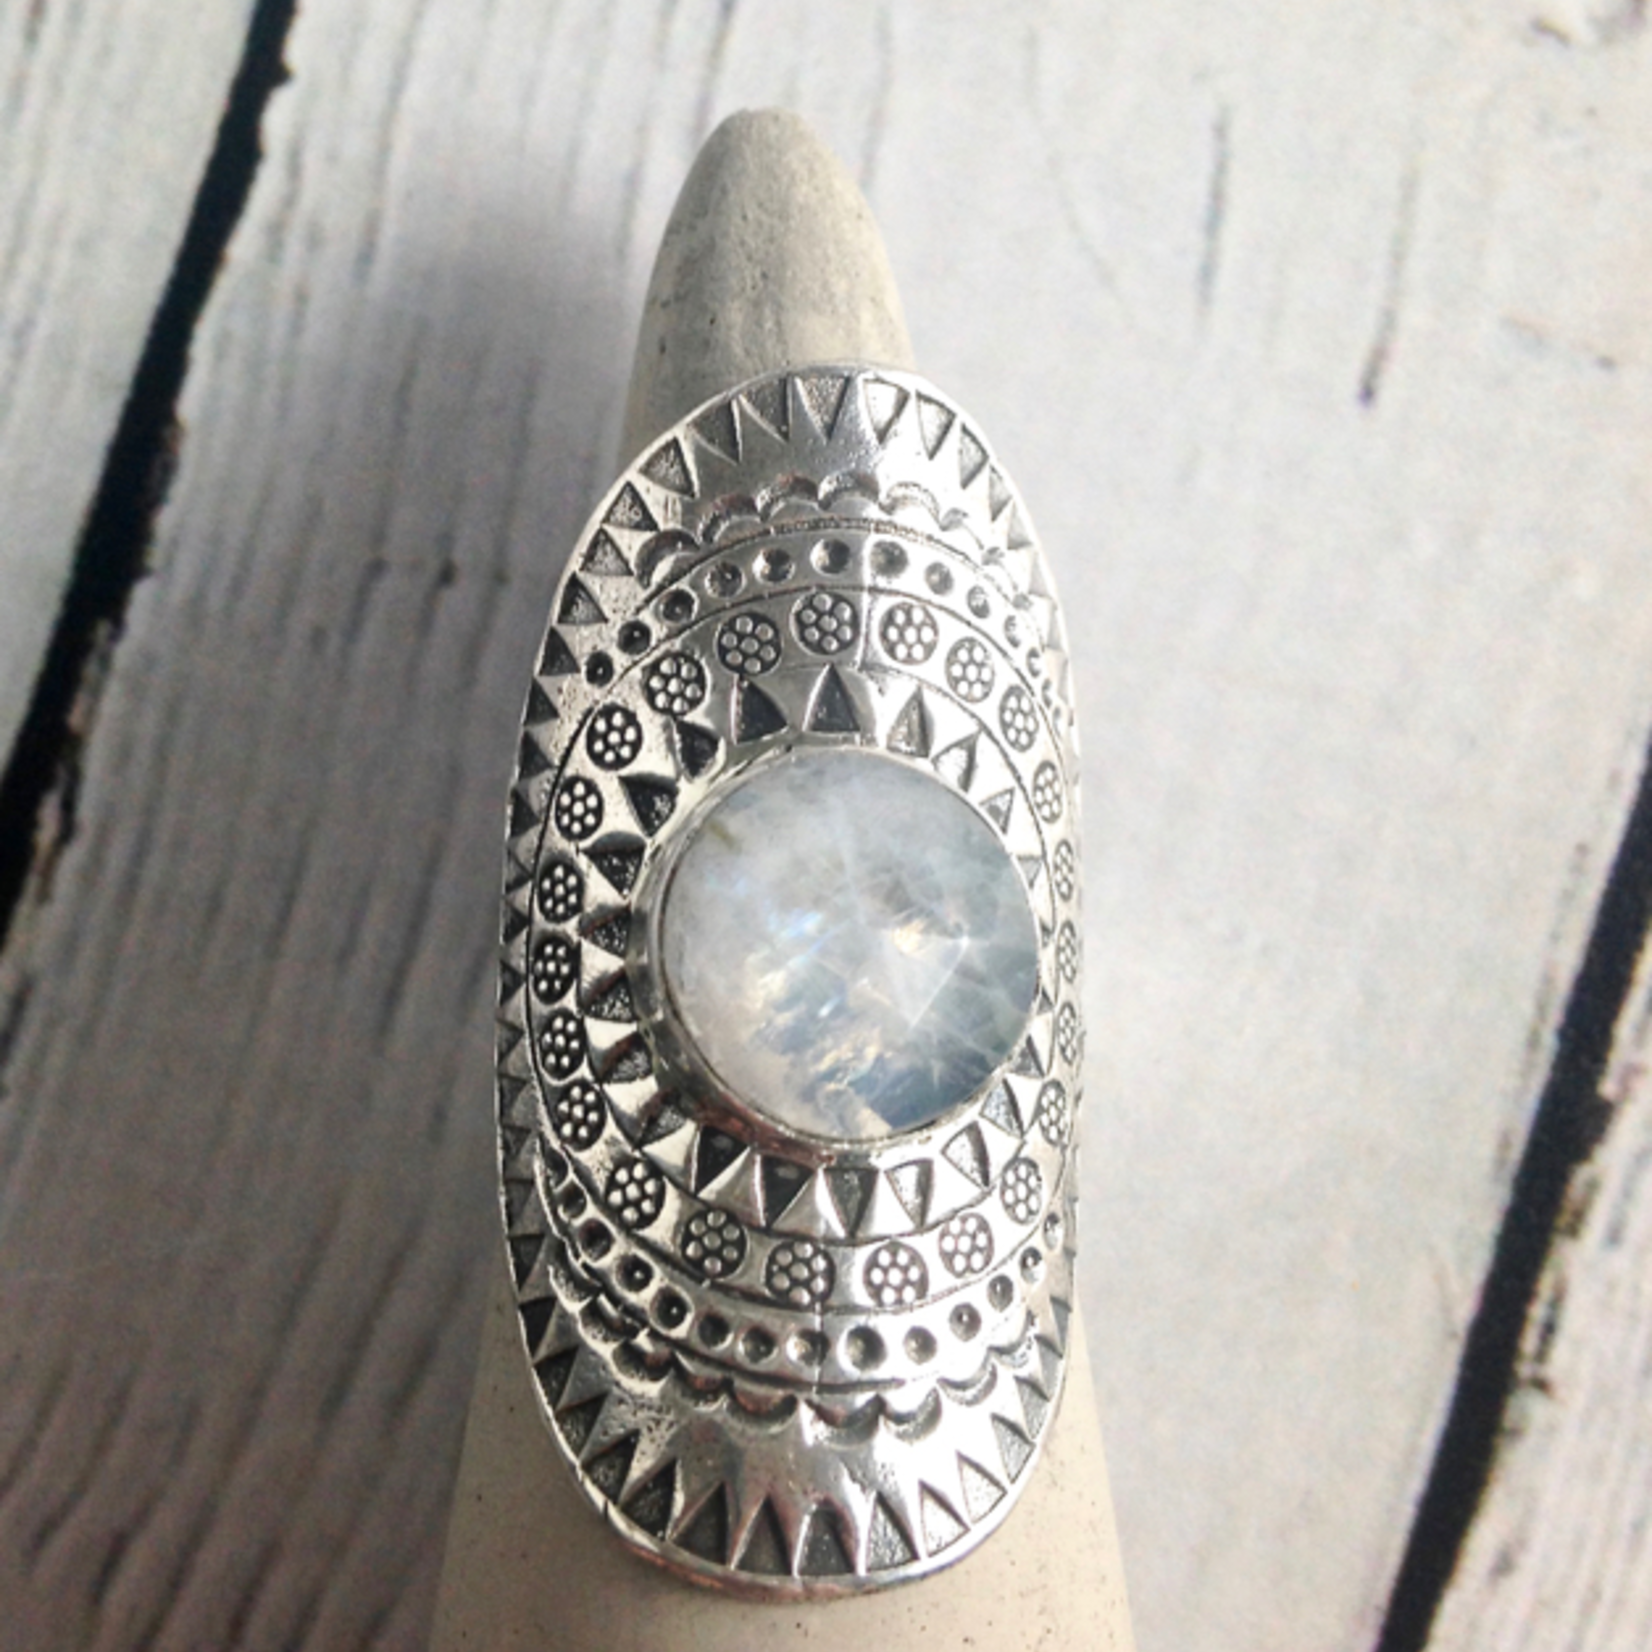 hilltribe Stamped Silver Ring with Round Faceted Moonstone, Size 7